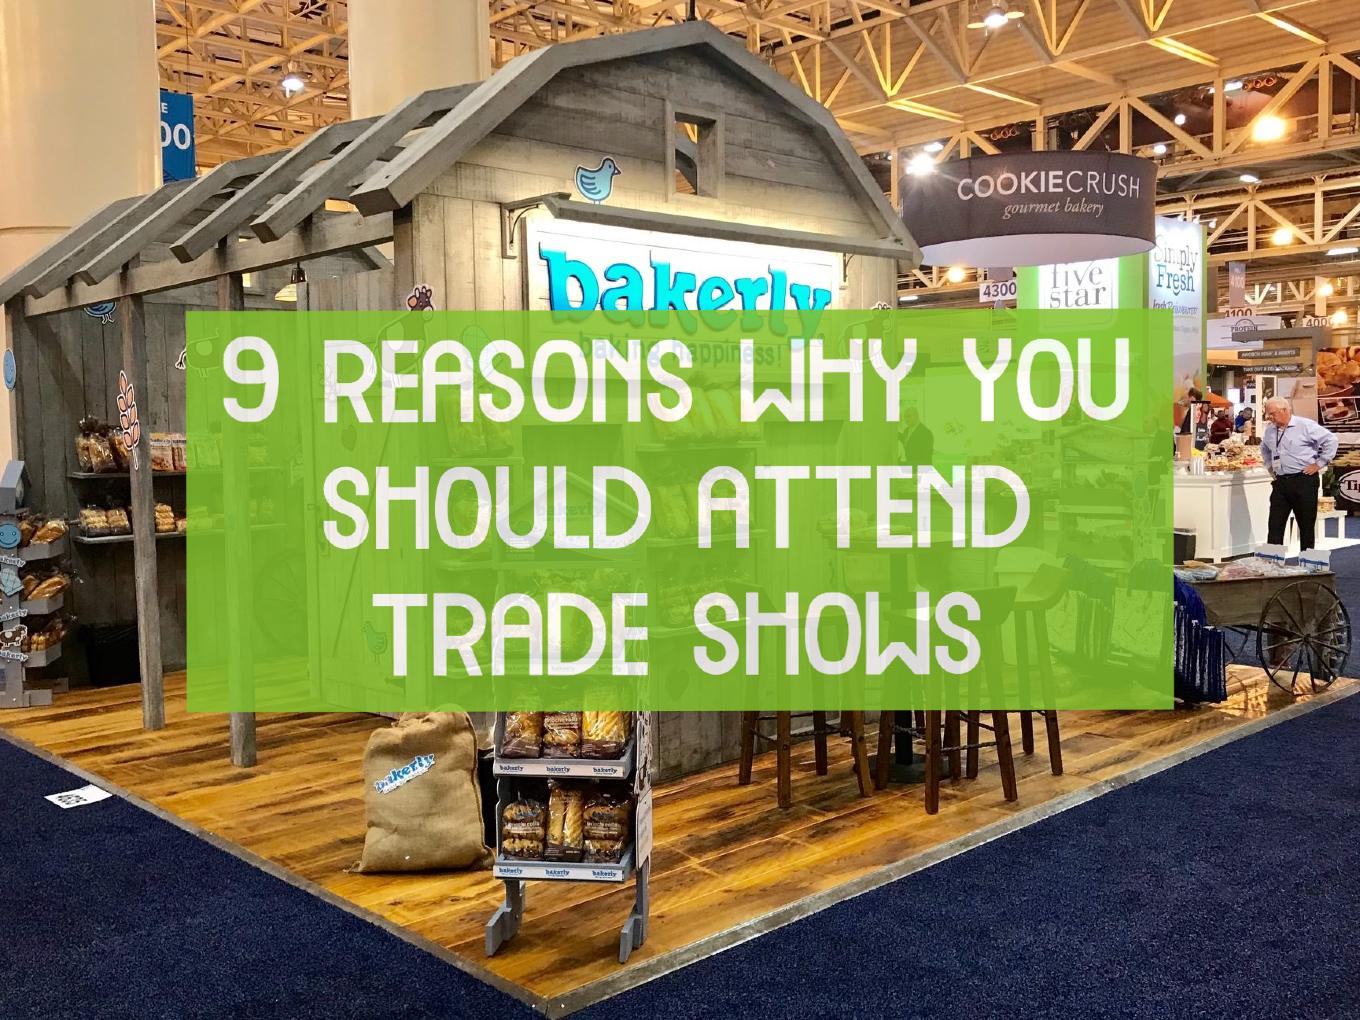 Why attend trade shows